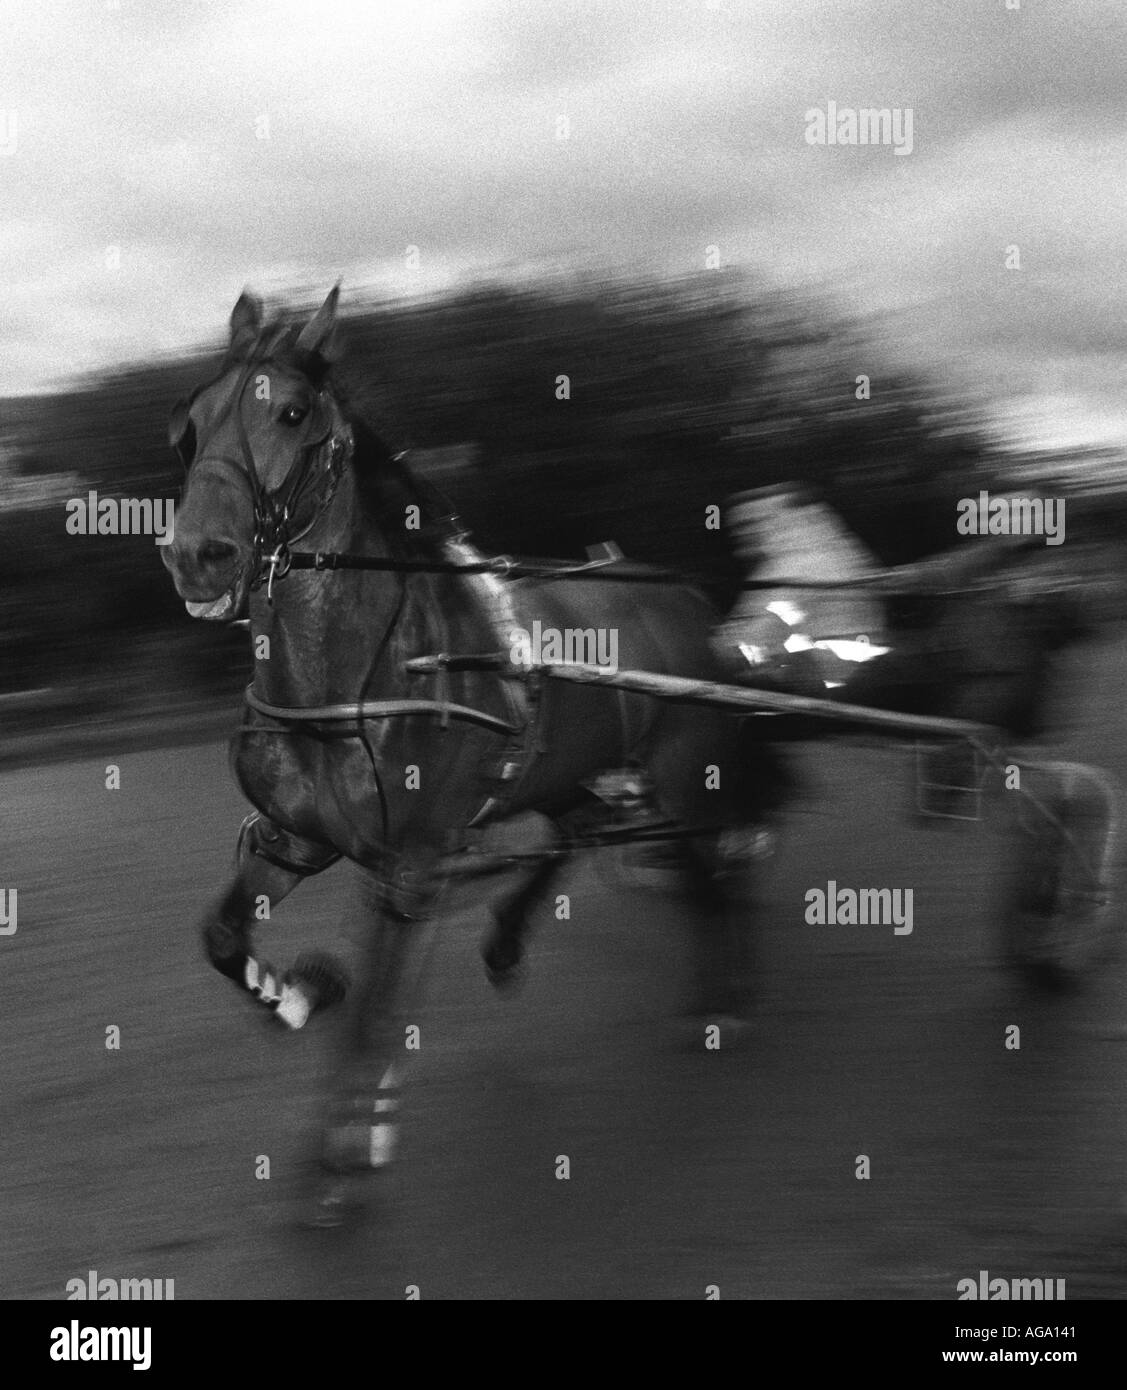 Gypsy trotting race. Gypsy horse being put through his paces for a pacing race, where legs on each side move together Stock Photo